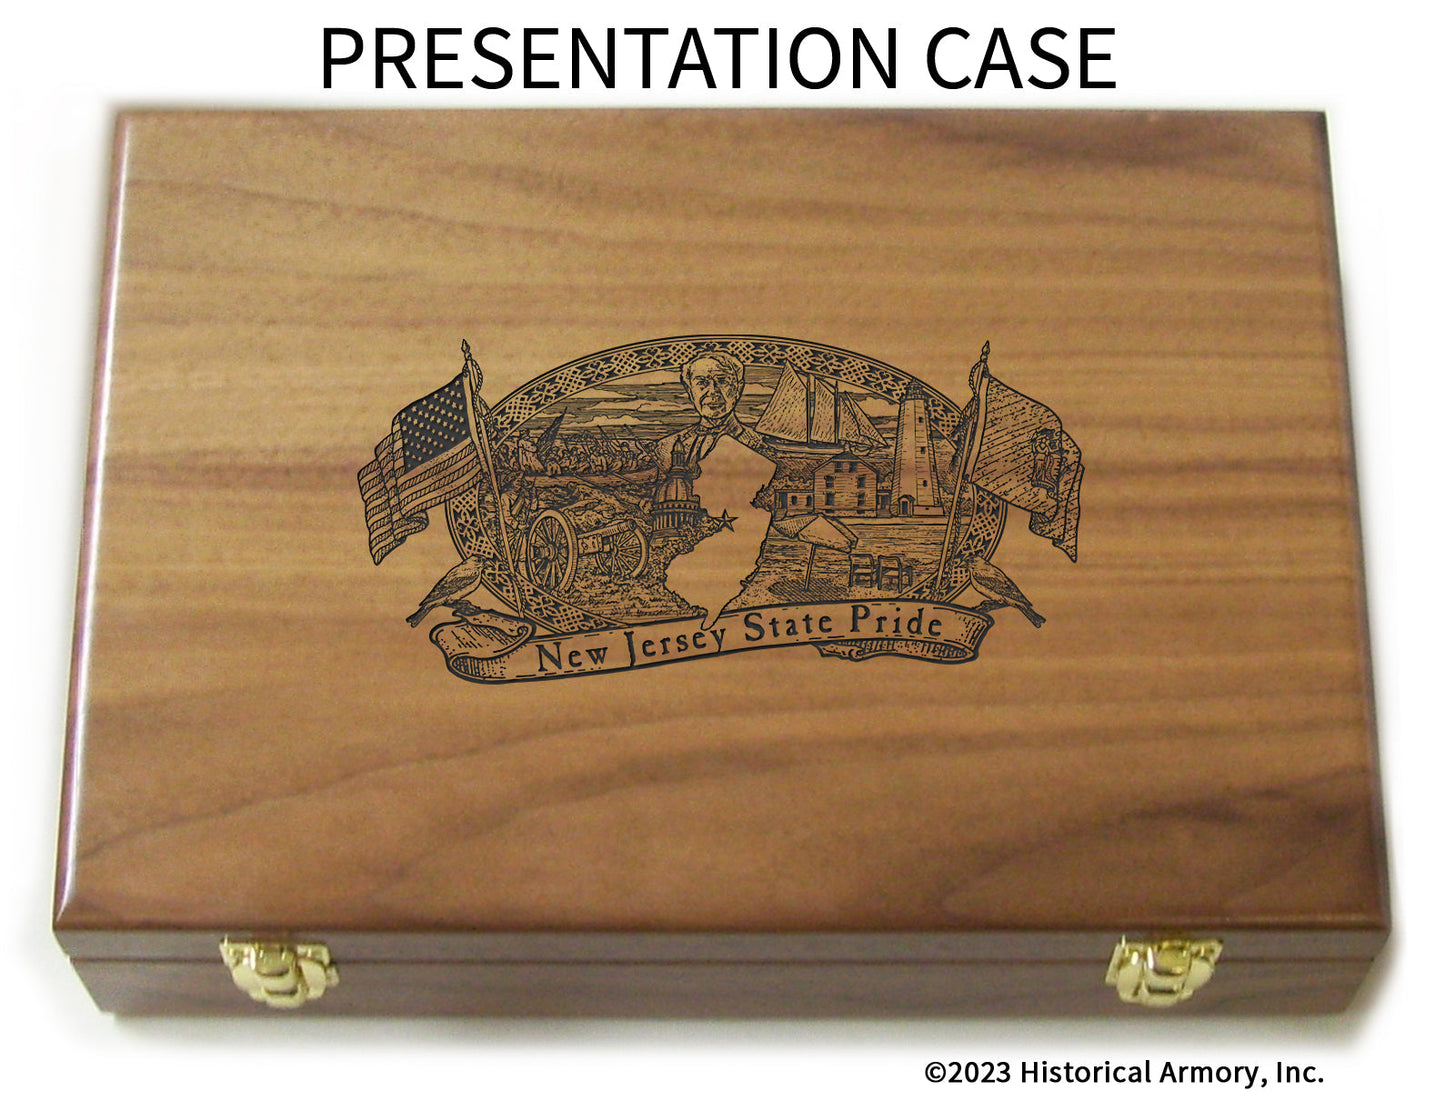 New Jersey State Pride Limited Edition Engraved 1911 Presentation Case